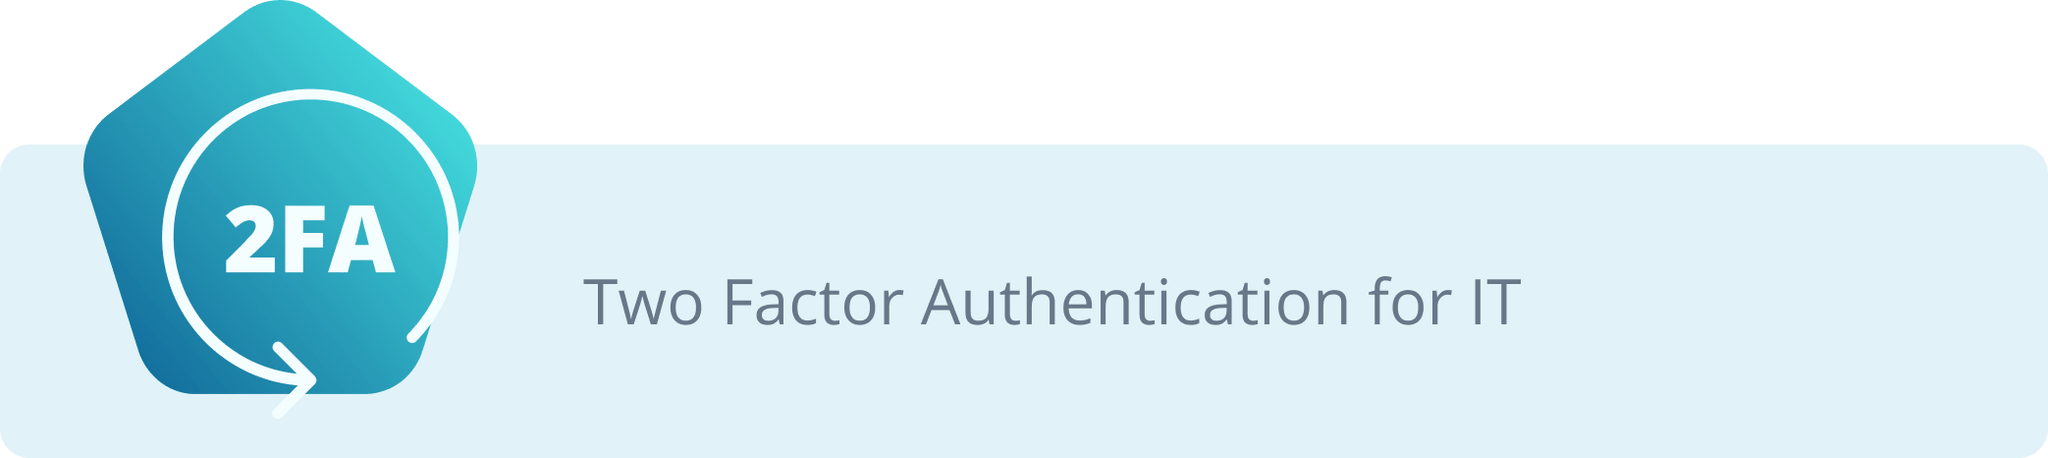 Two Factor Authentication for IT